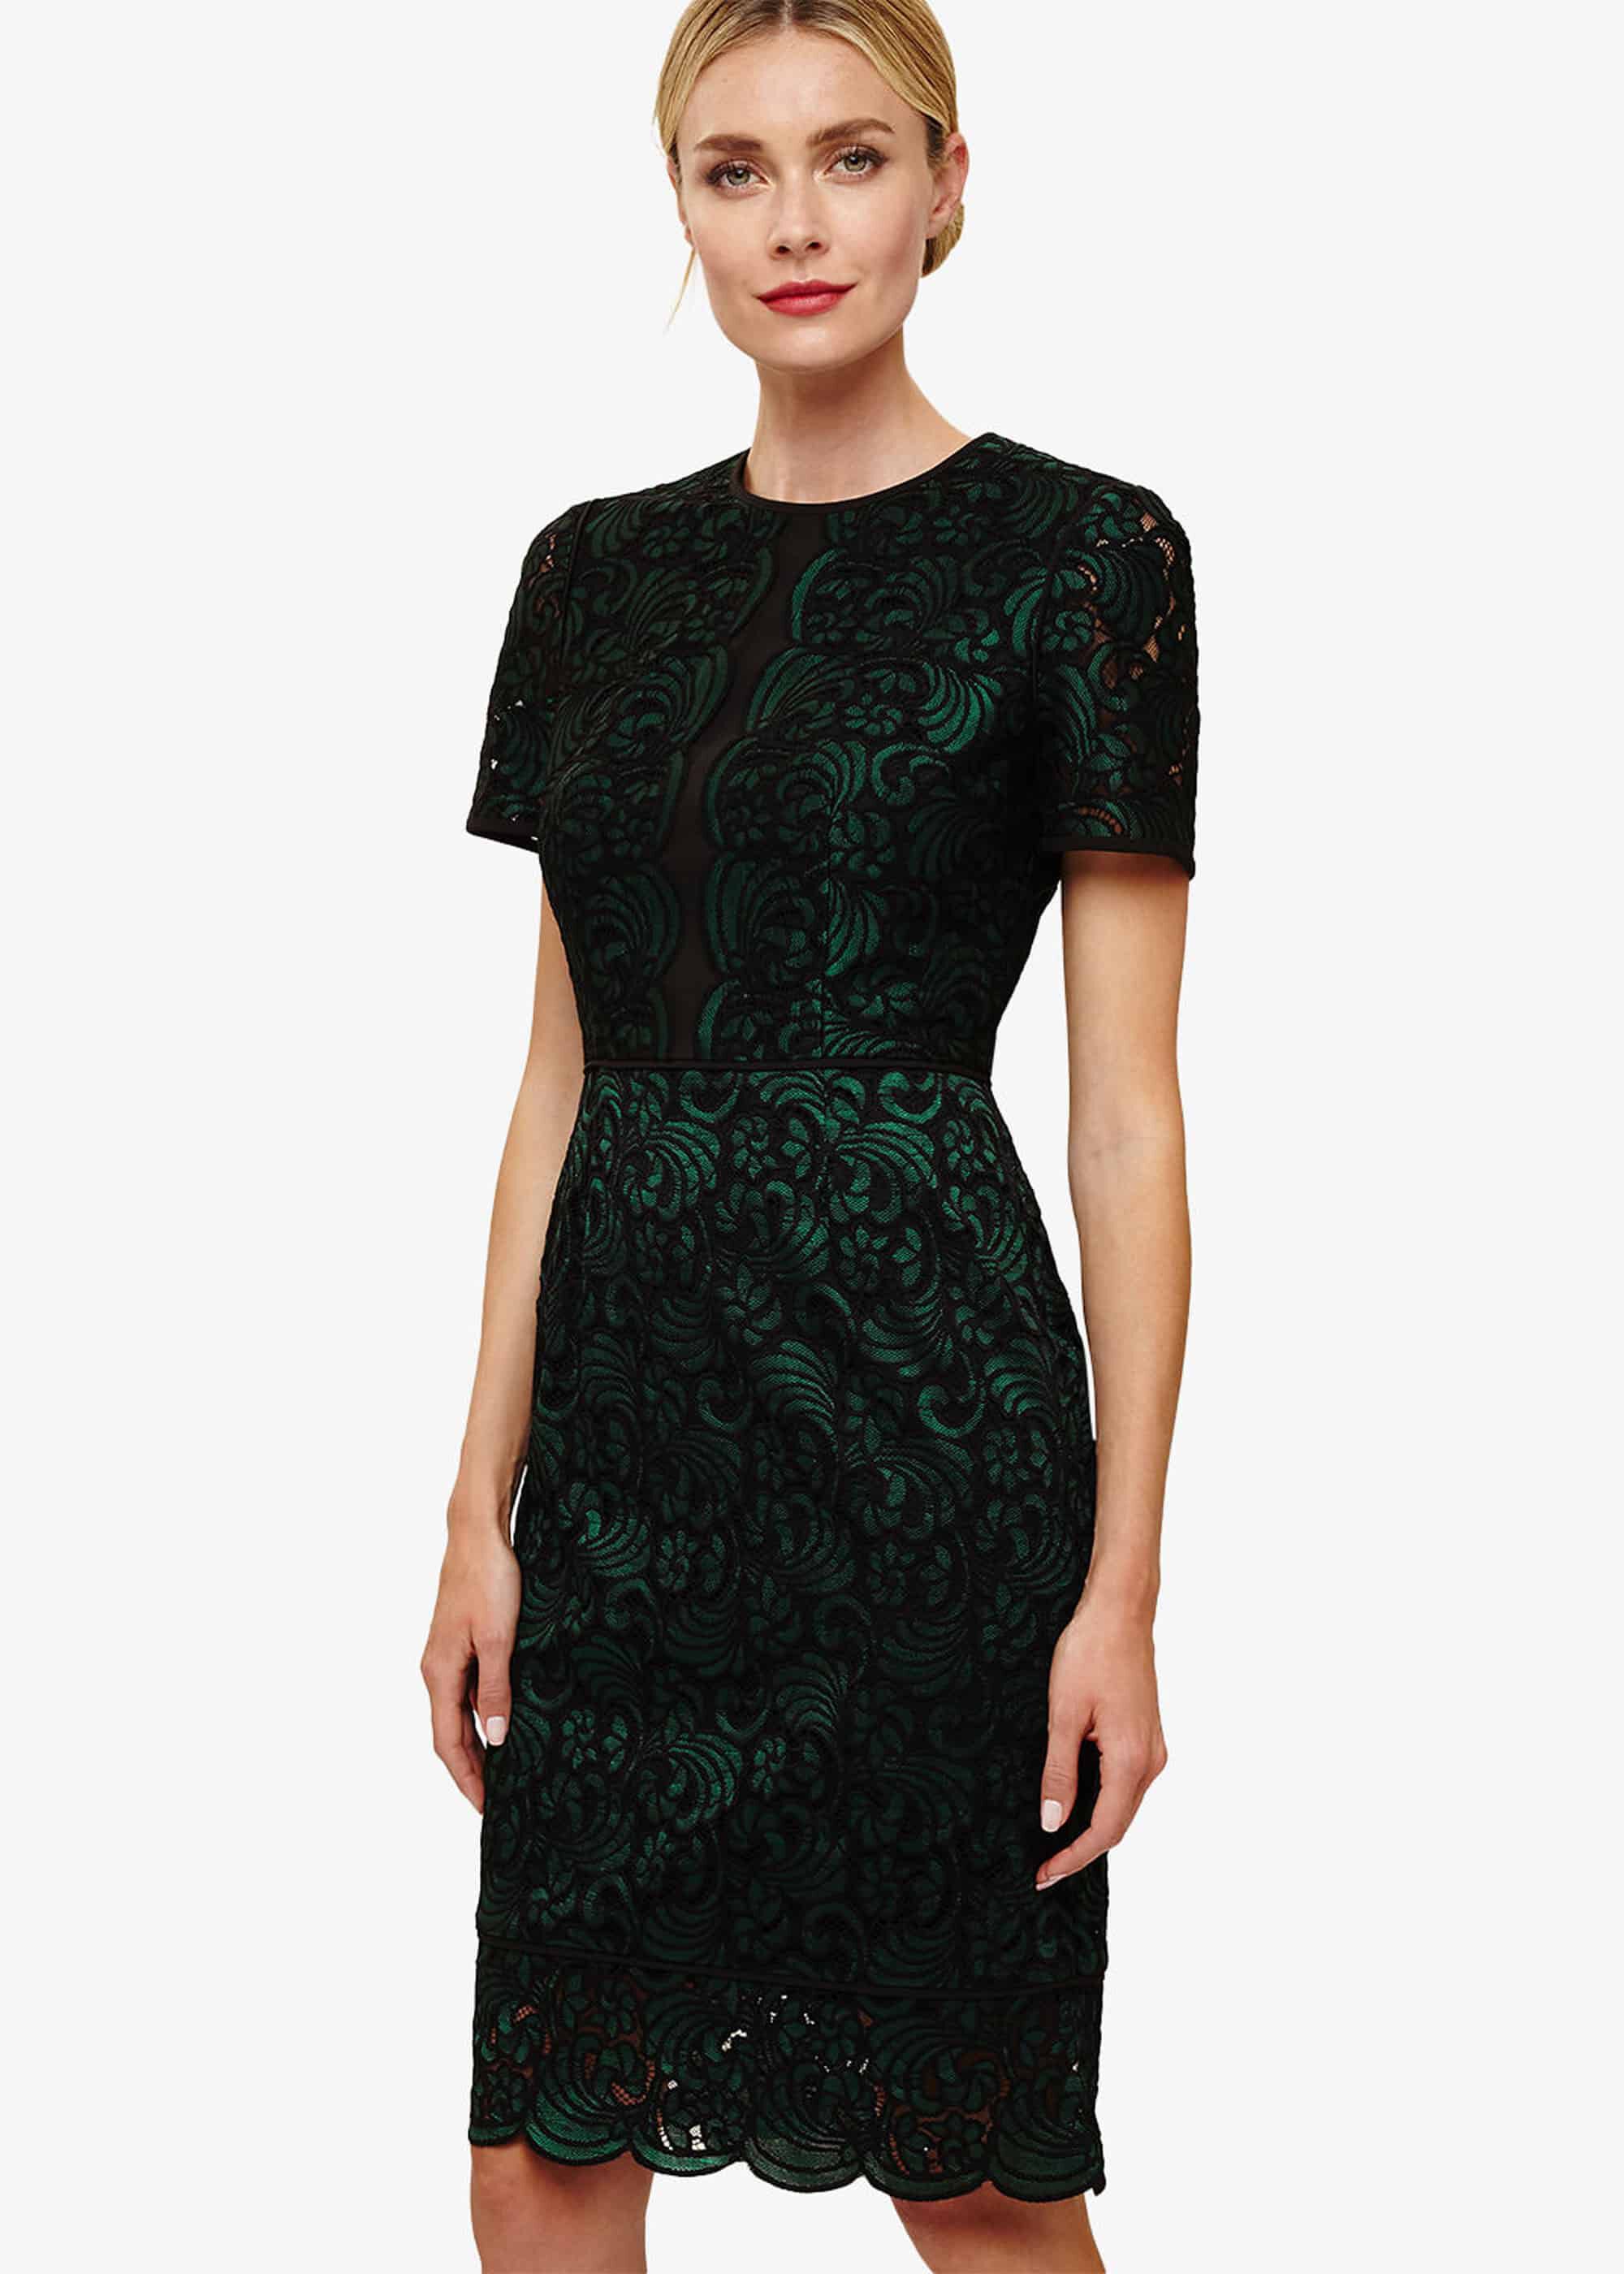 Green Dress Phase Eight Discount, 52 ...